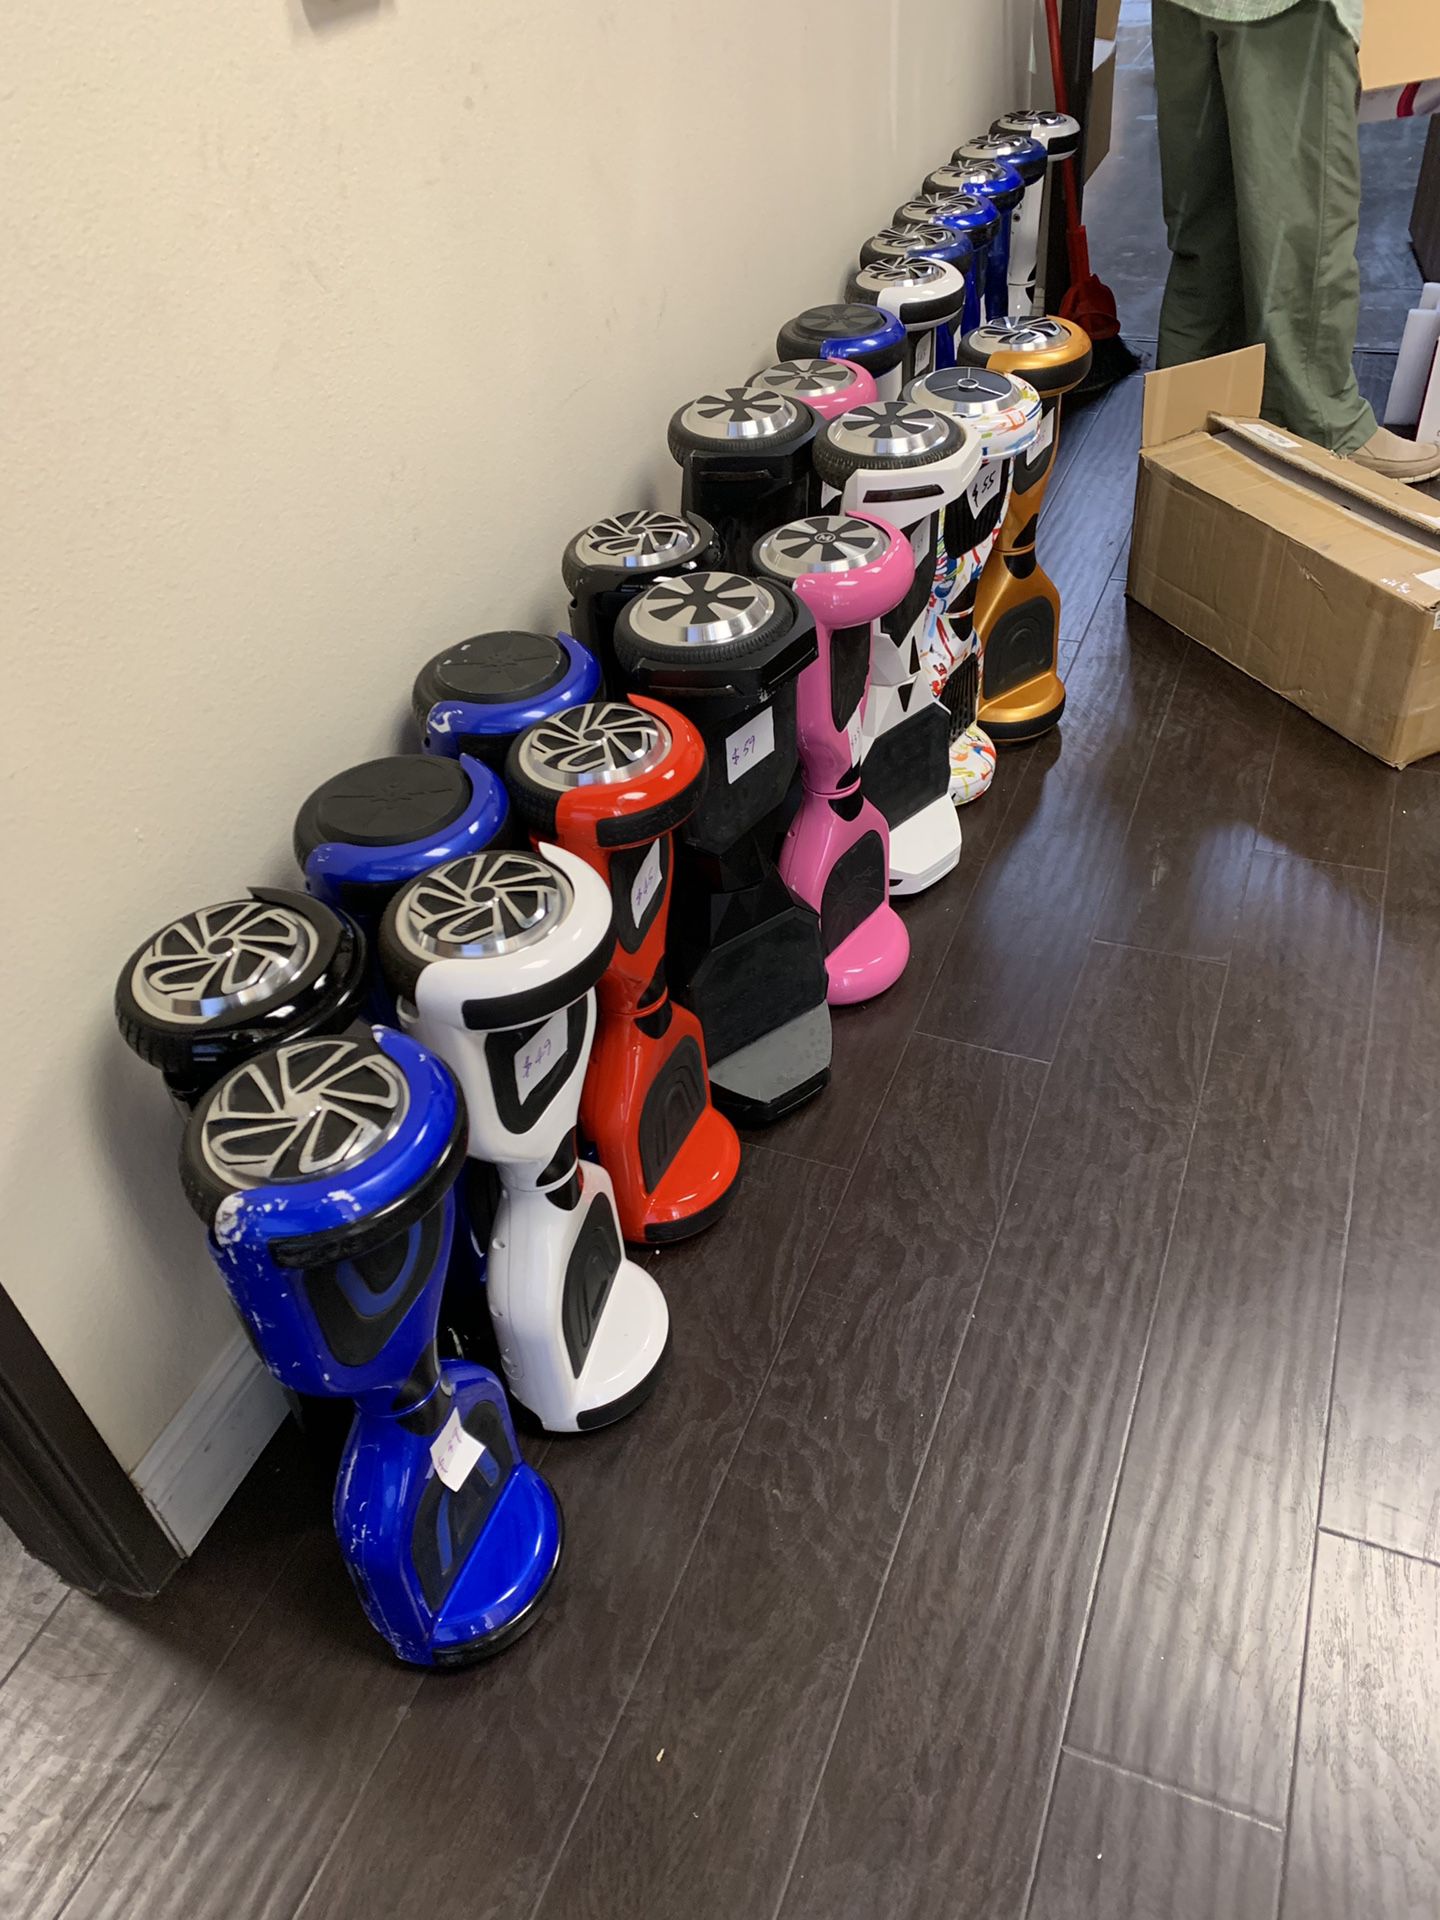 Cheap hoverboards with led lights perfect working condition factory clearance price sale